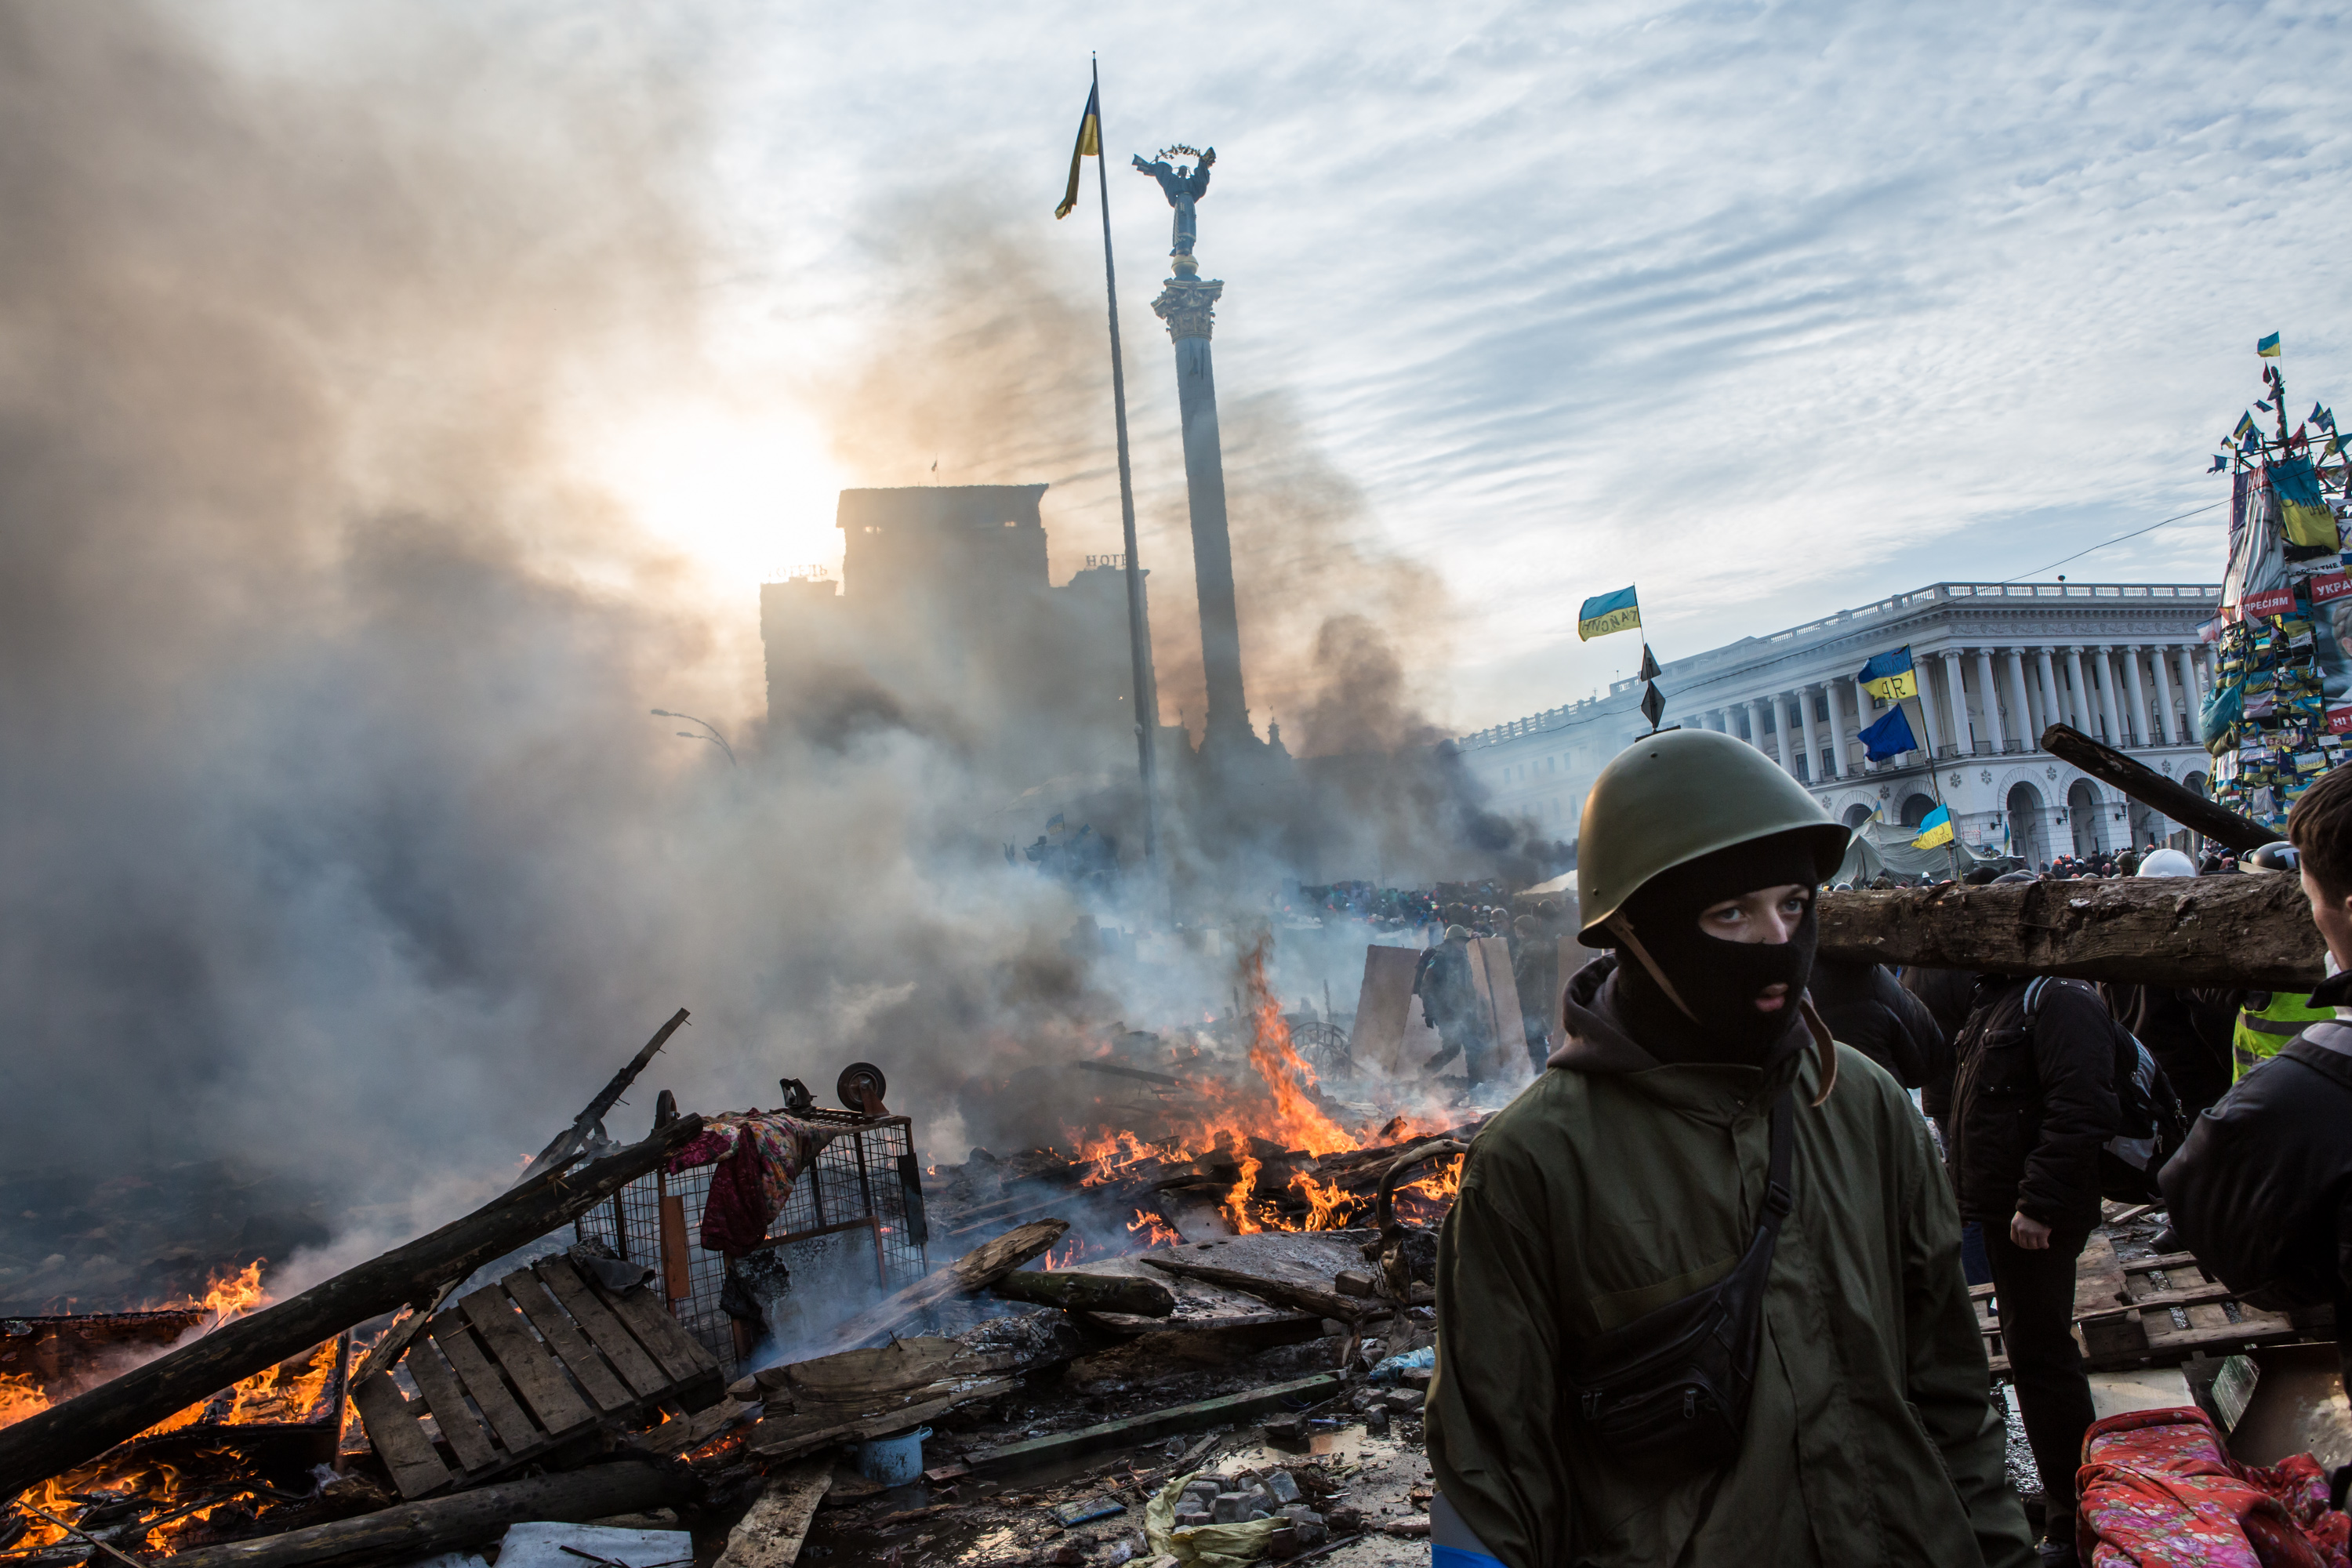 Anti-government protesters walk amid debris and flames near the perimeter of Independence Square, known as Maidan, on February 19, 2014 in Kiev, Ukraine.